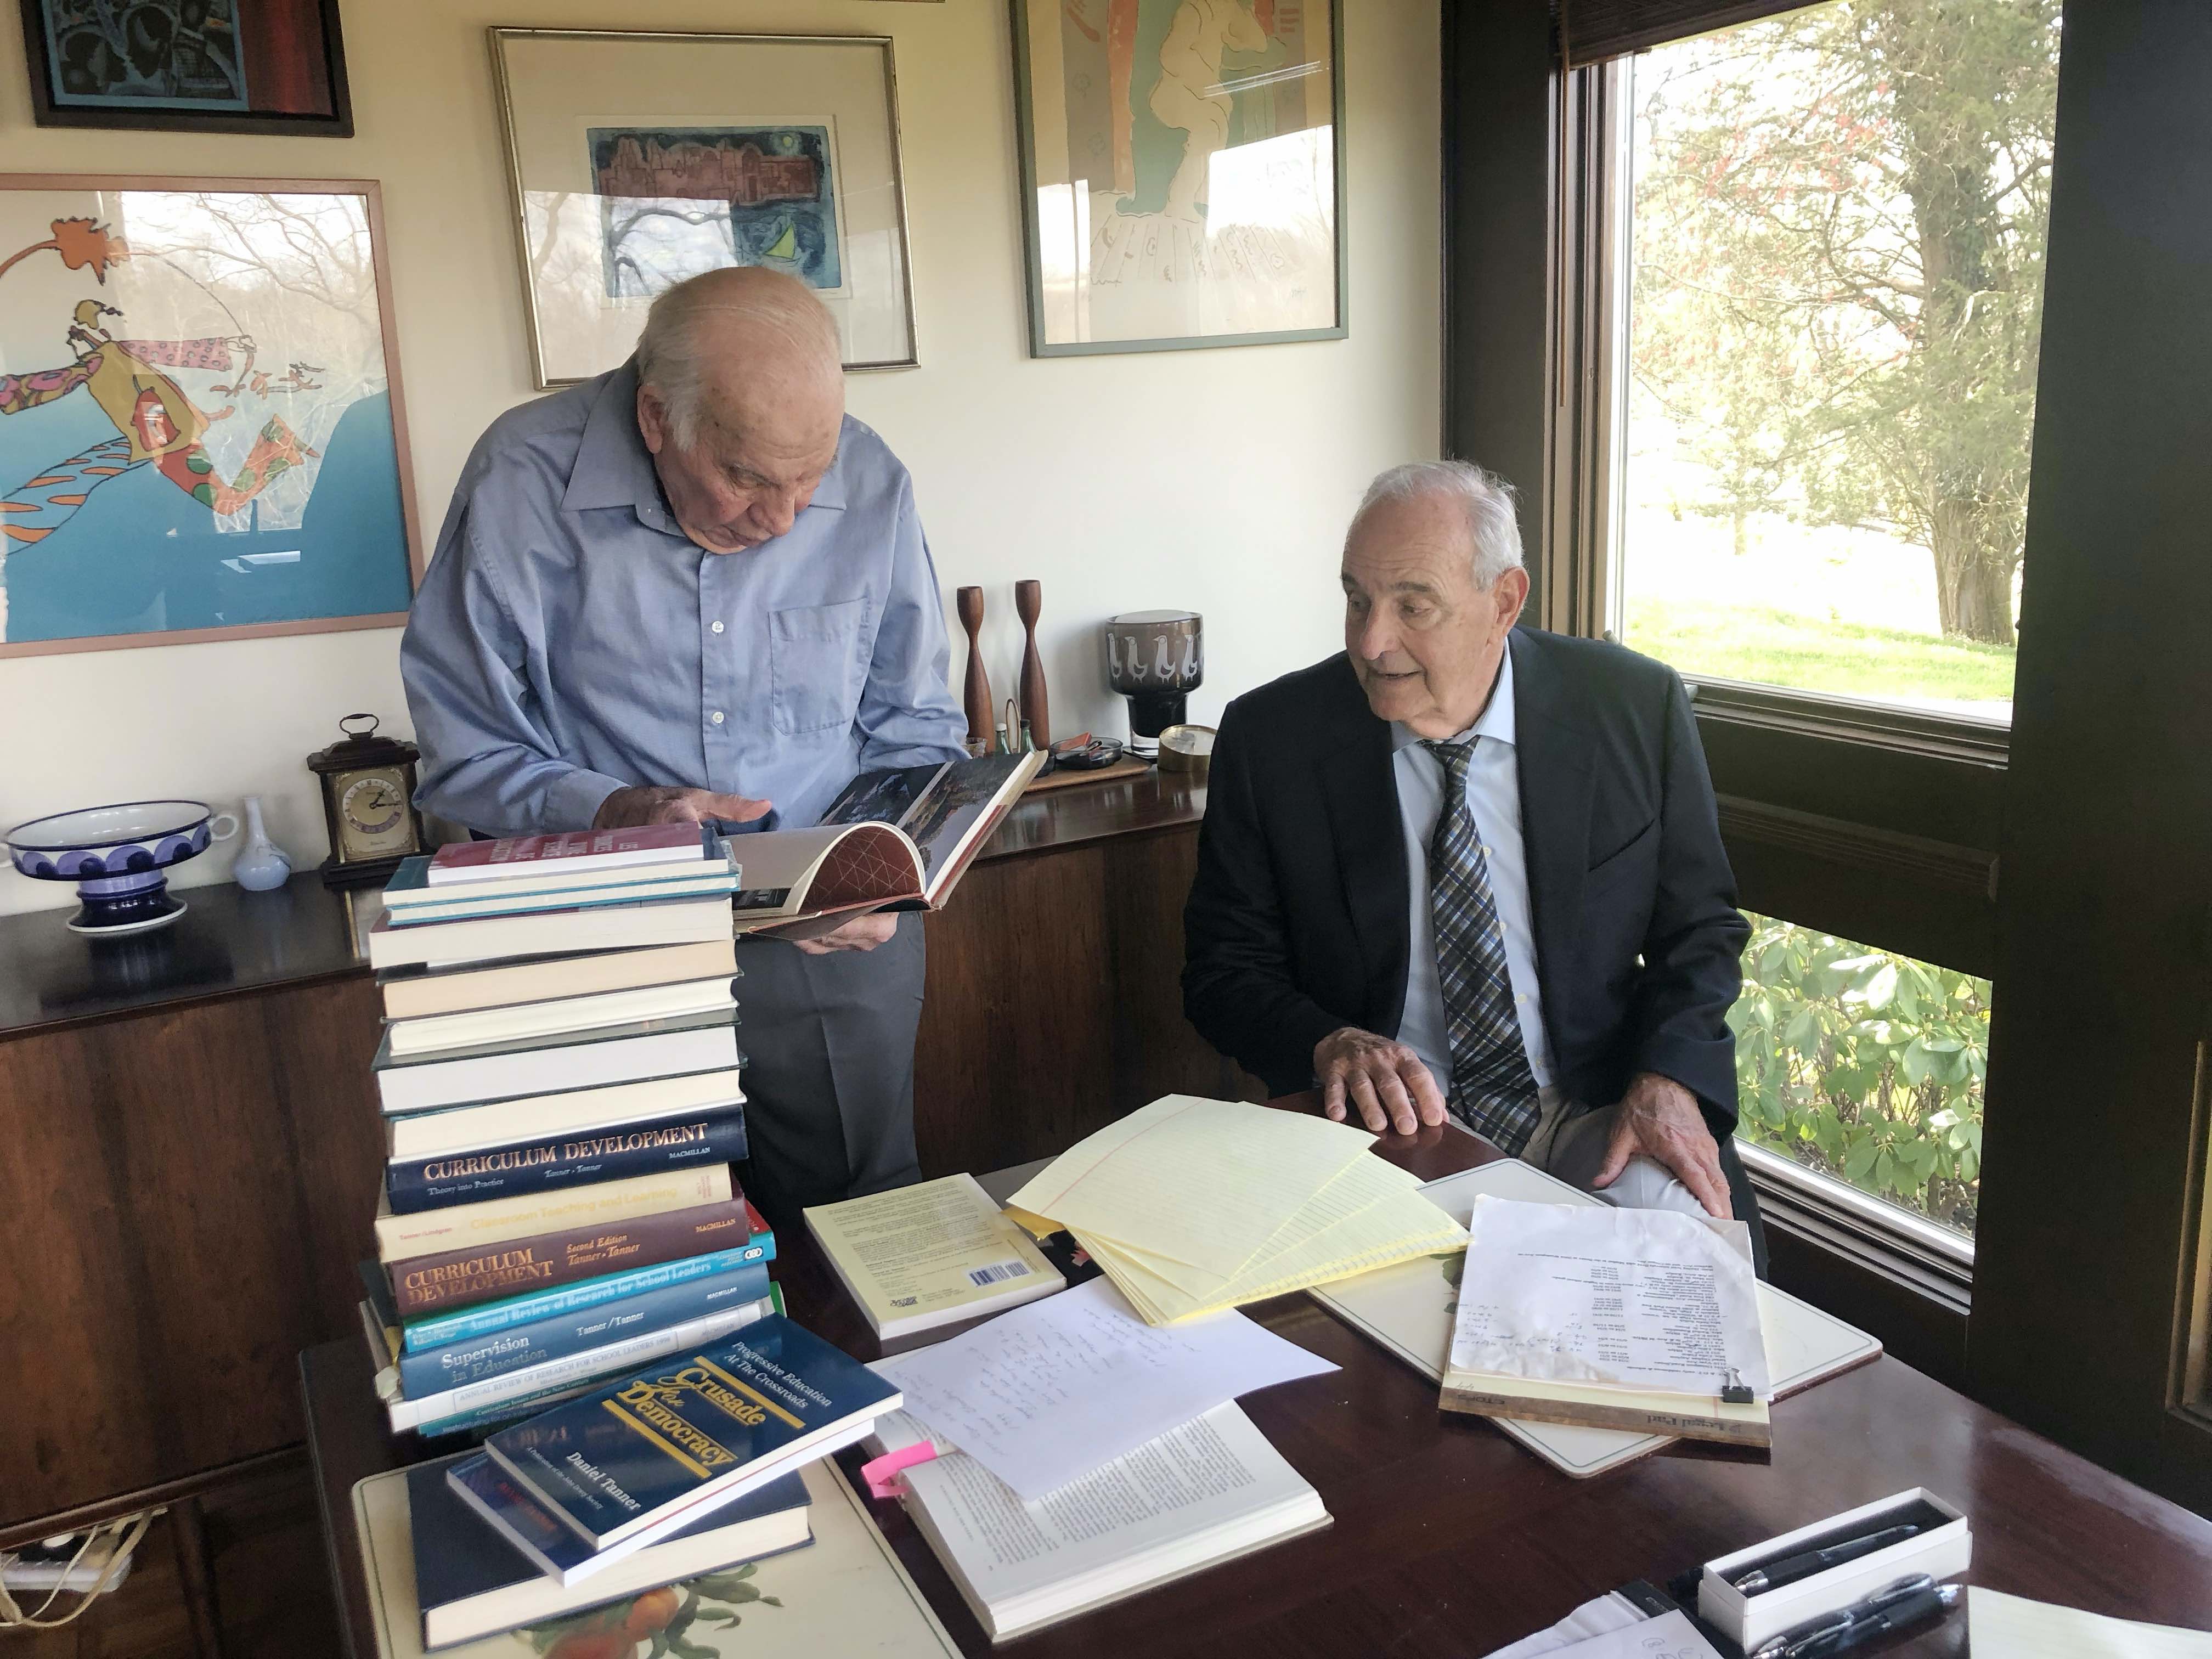 Daniel Tanner and Barry Galasso reviewing books in office